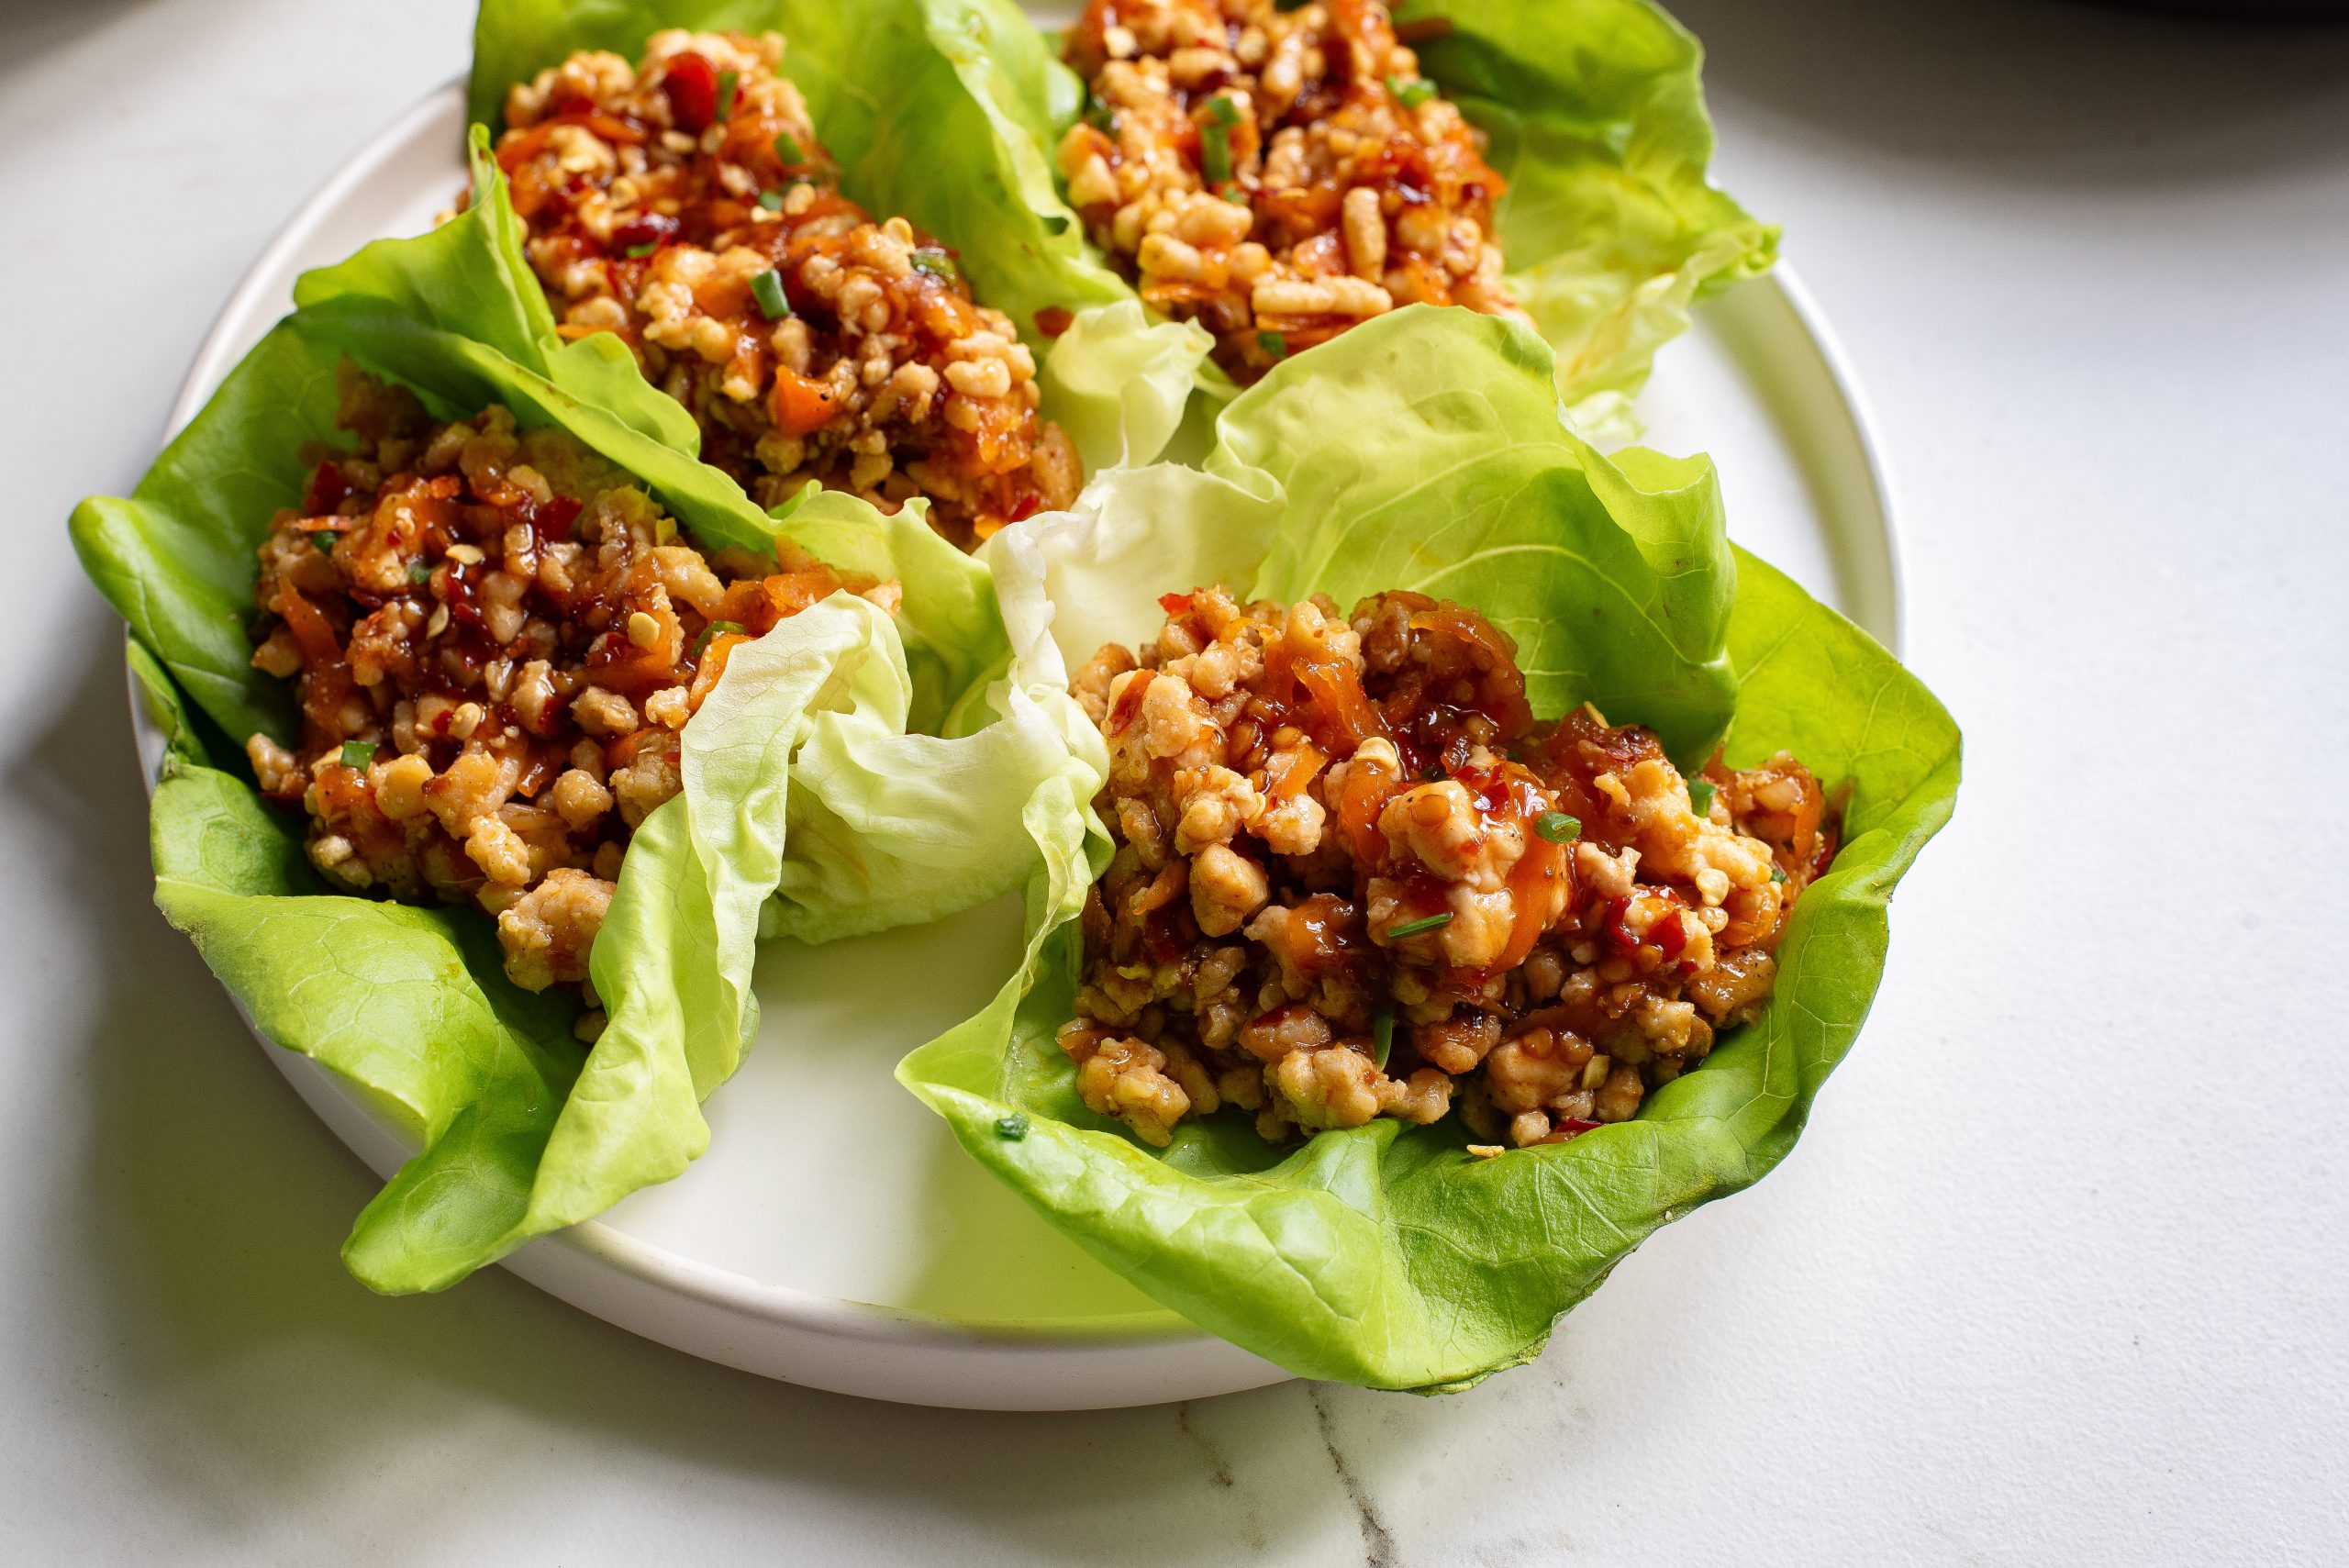 A plate of asian-style chicken lettuce wraps with a filling of ground meat, vegetables, and sauce.